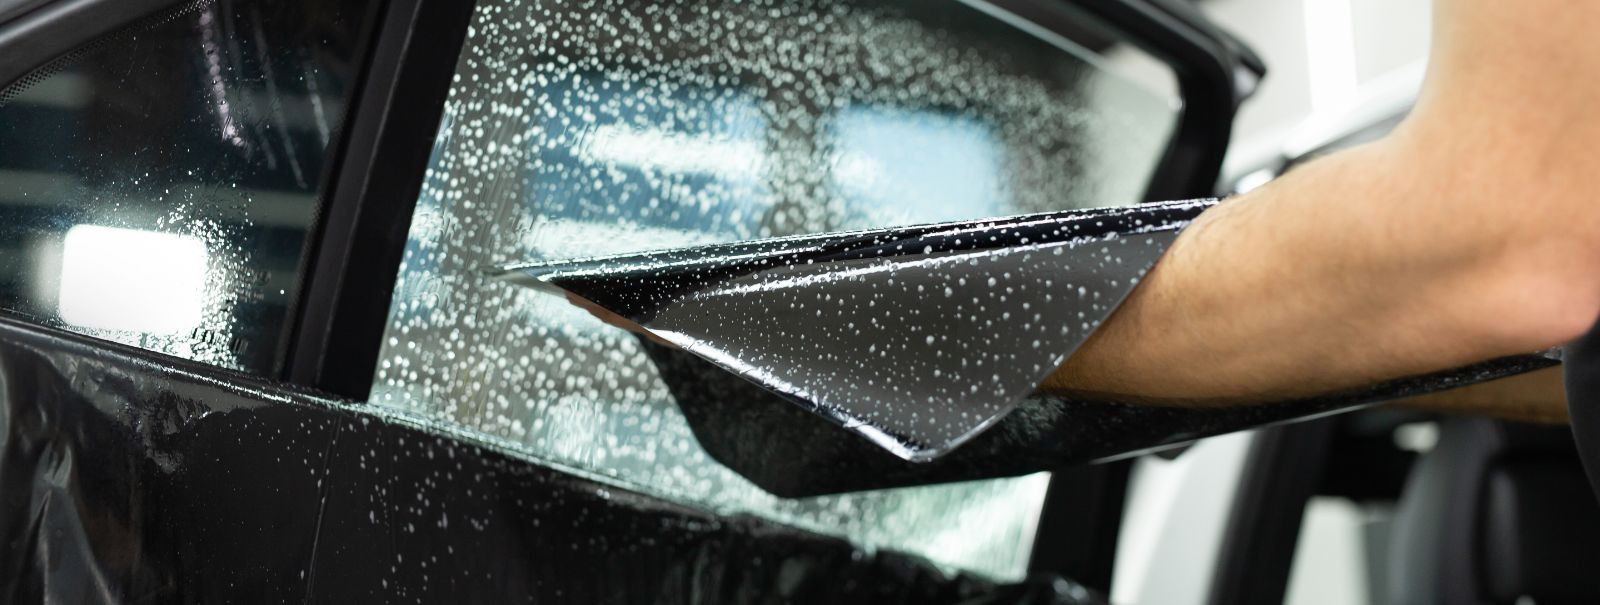 Glass toning, commonly referred to as window tinting, is the process of applying a thin laminate film to a vehicle's glass to darken it. The benefits of glass t